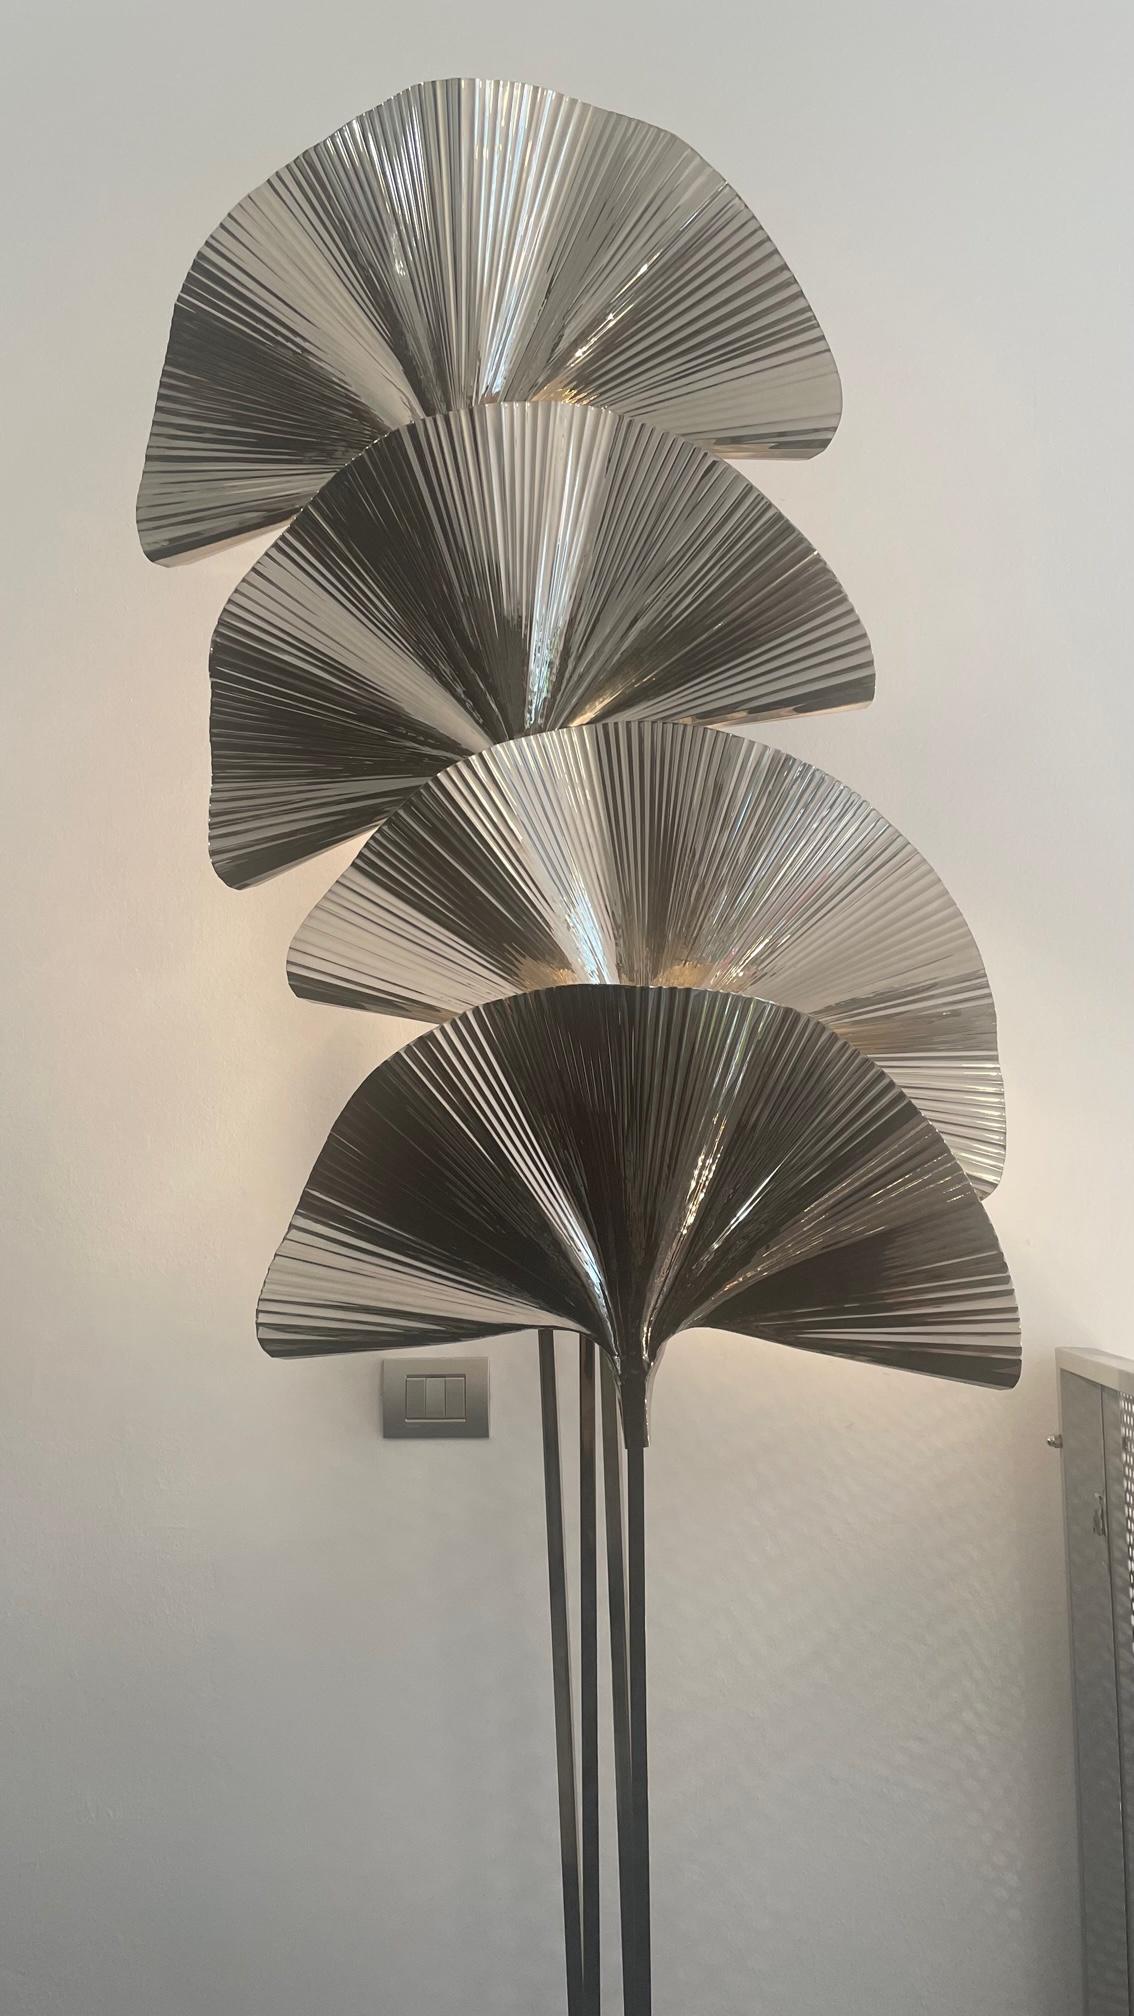 The Italian floor lamp made entirely of 21st century nickel-plated brass. The lamp is a modern and elegant lighting option. The great special feature of the lamp are its nickel-plated brass leaves that act as light covers and give an almost tropical